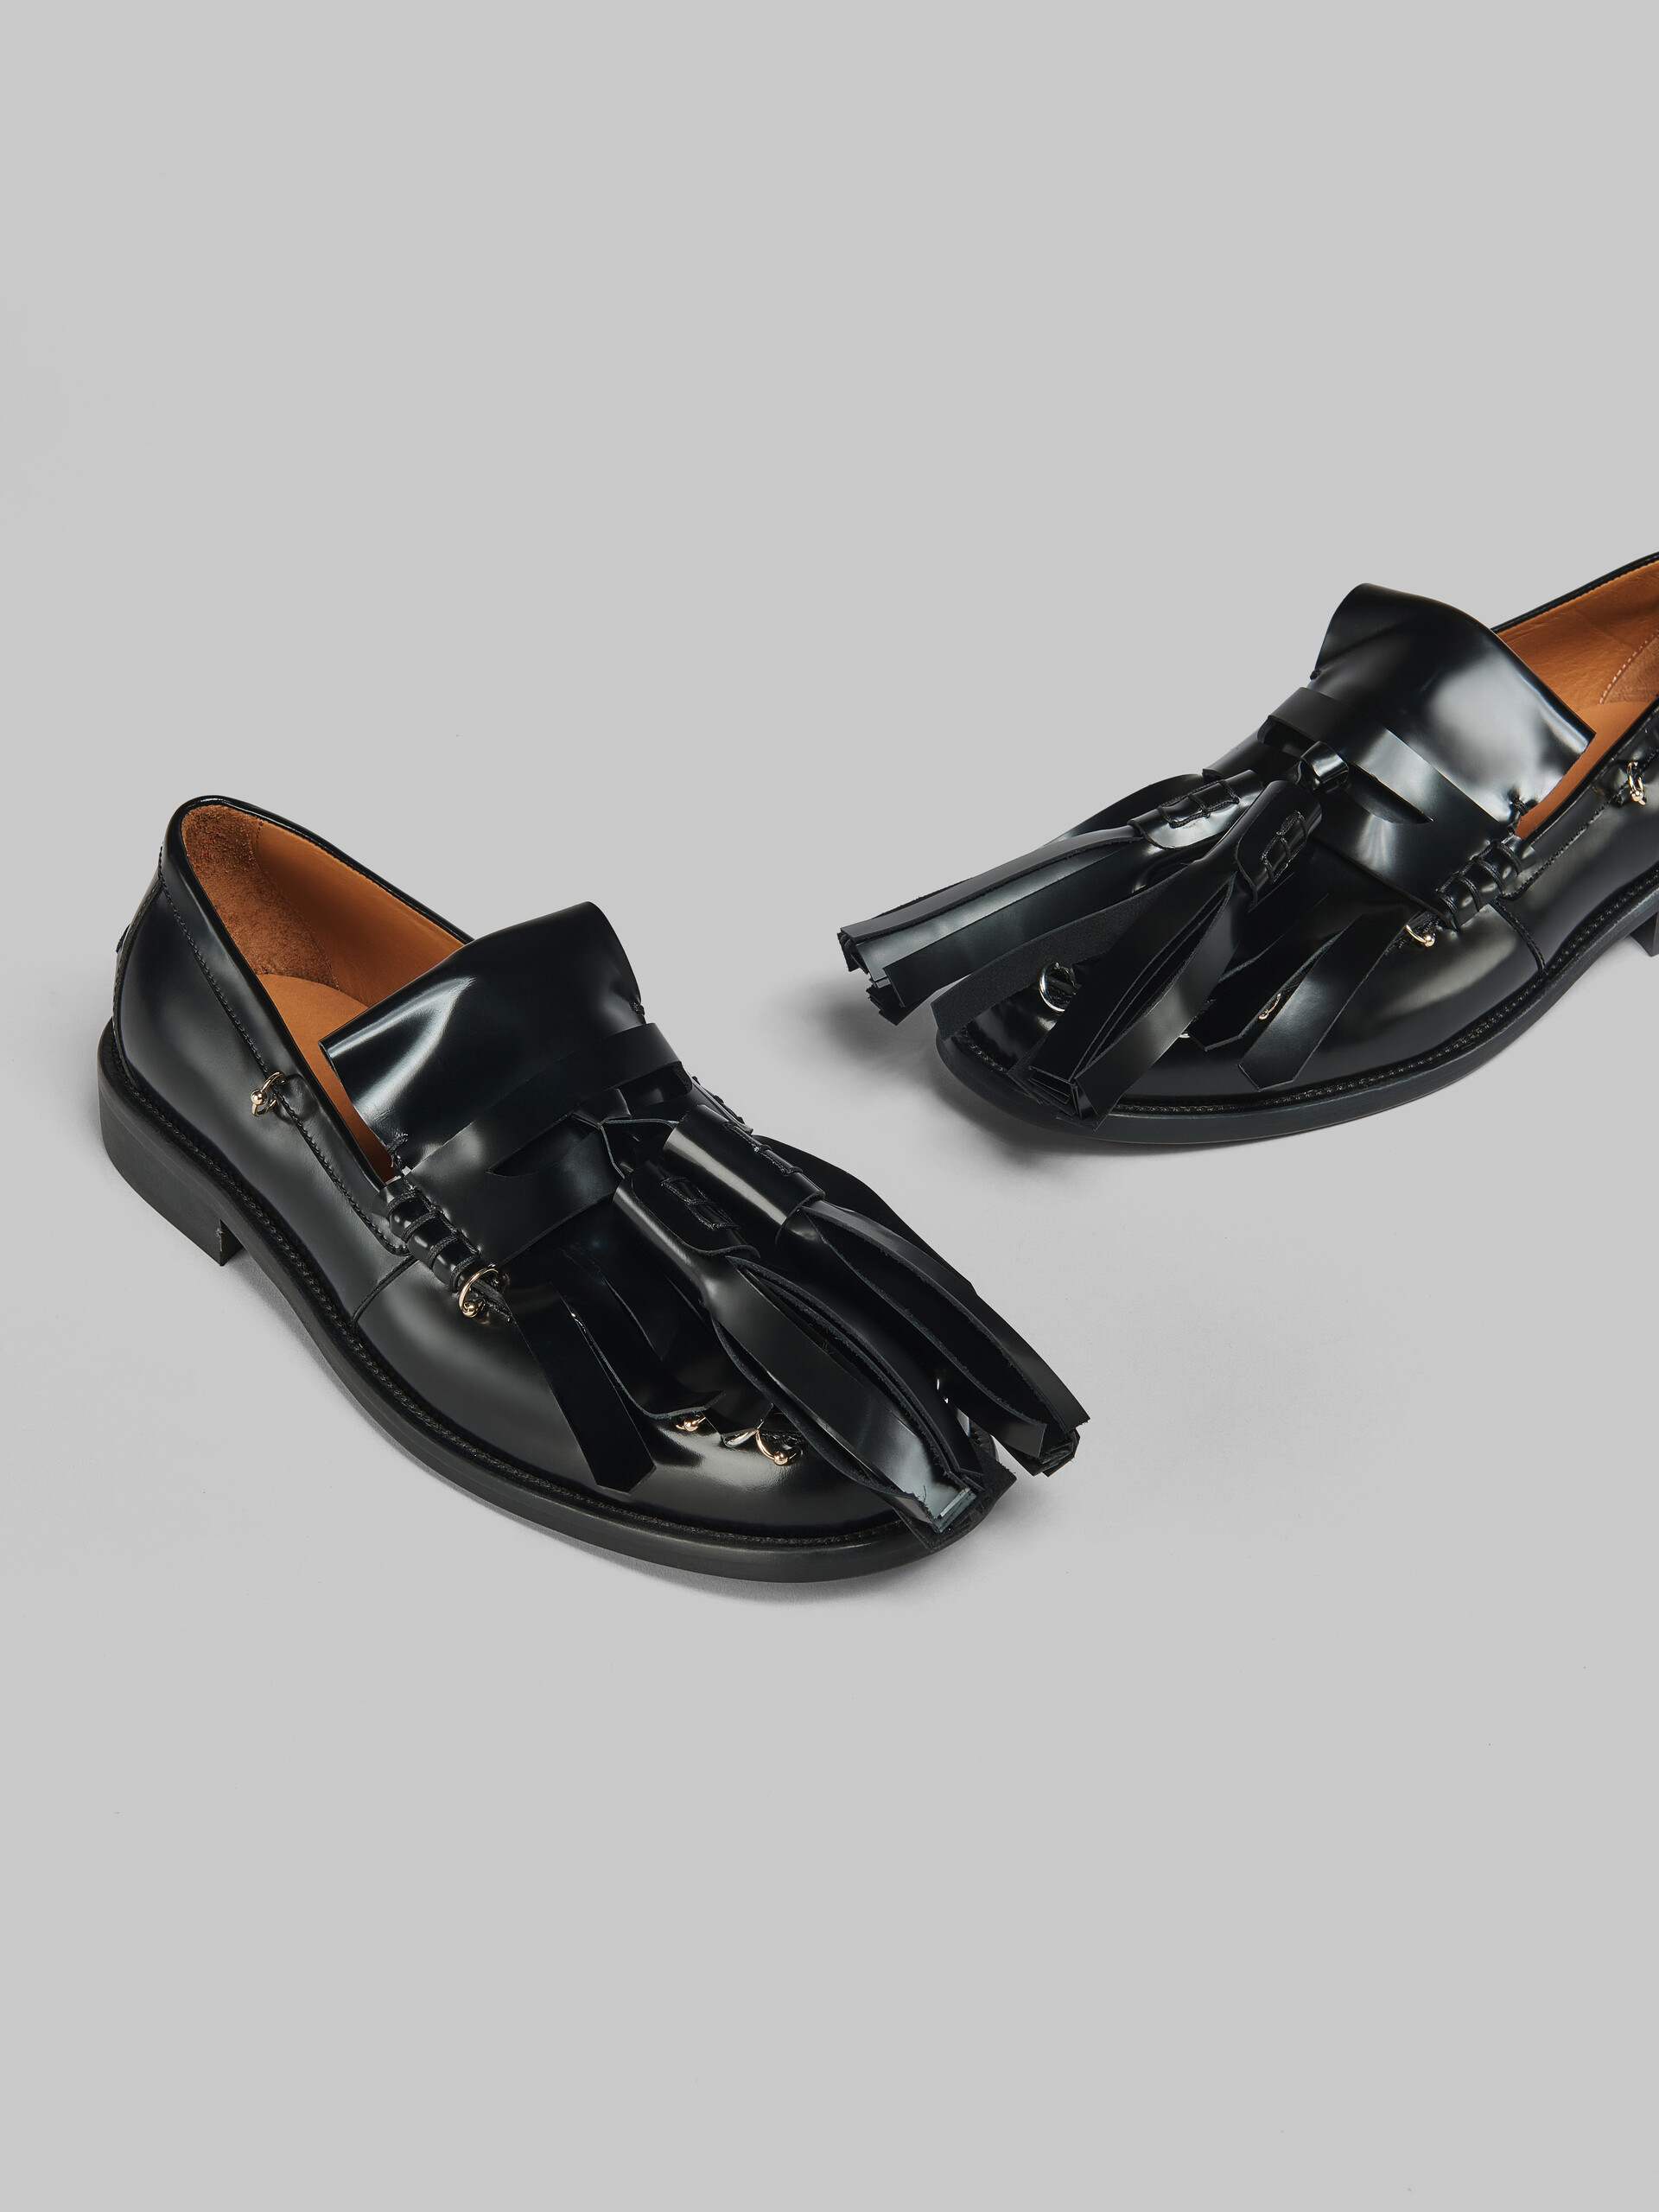 Black leather Bambi loafer with maxi tassels - Lace-ups - Image 4